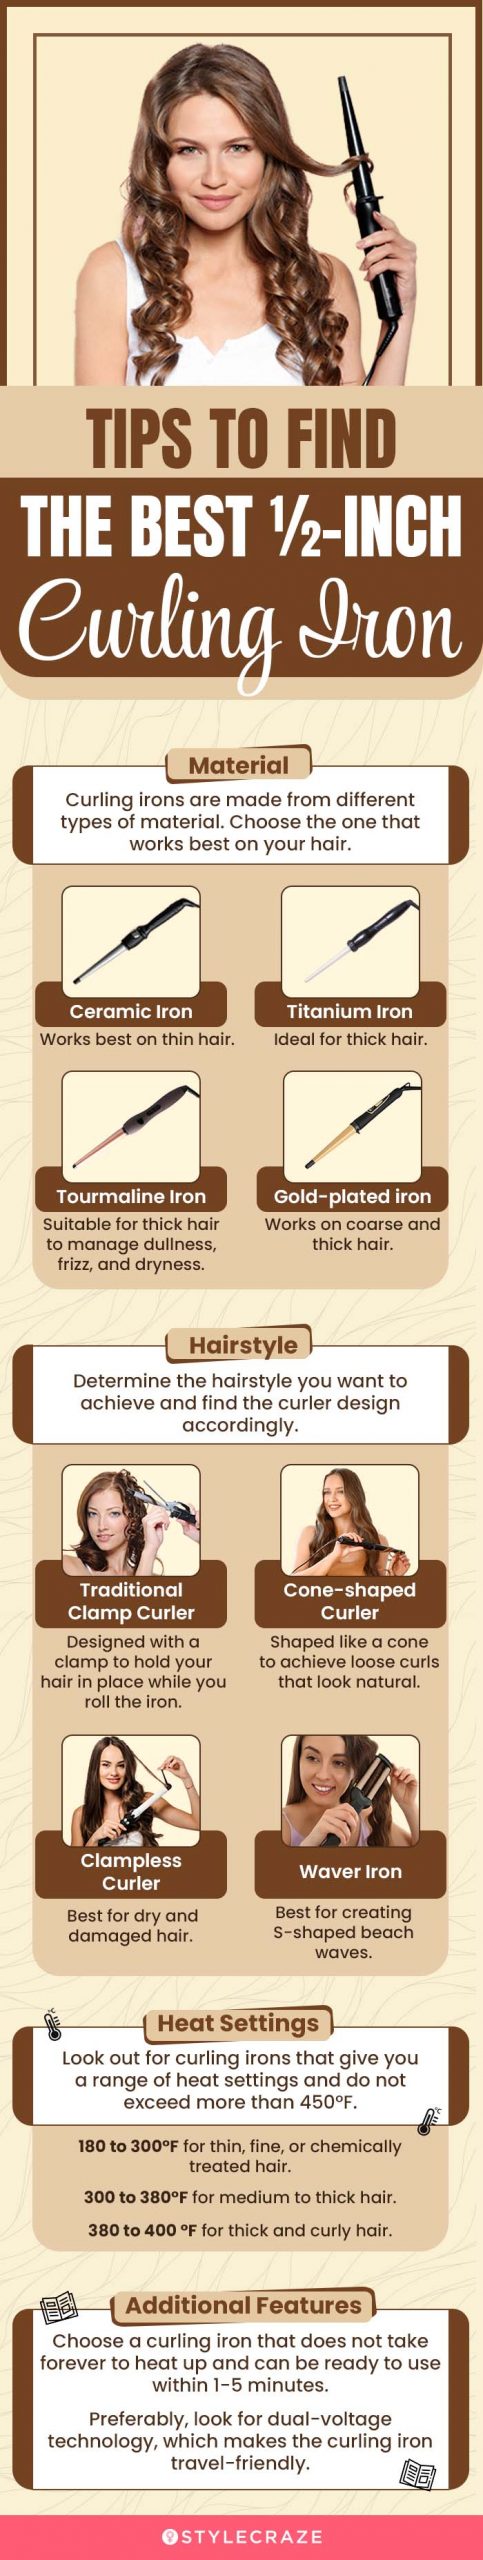 Tips To Find The Best ½-Inch Curling Iron (infographic)